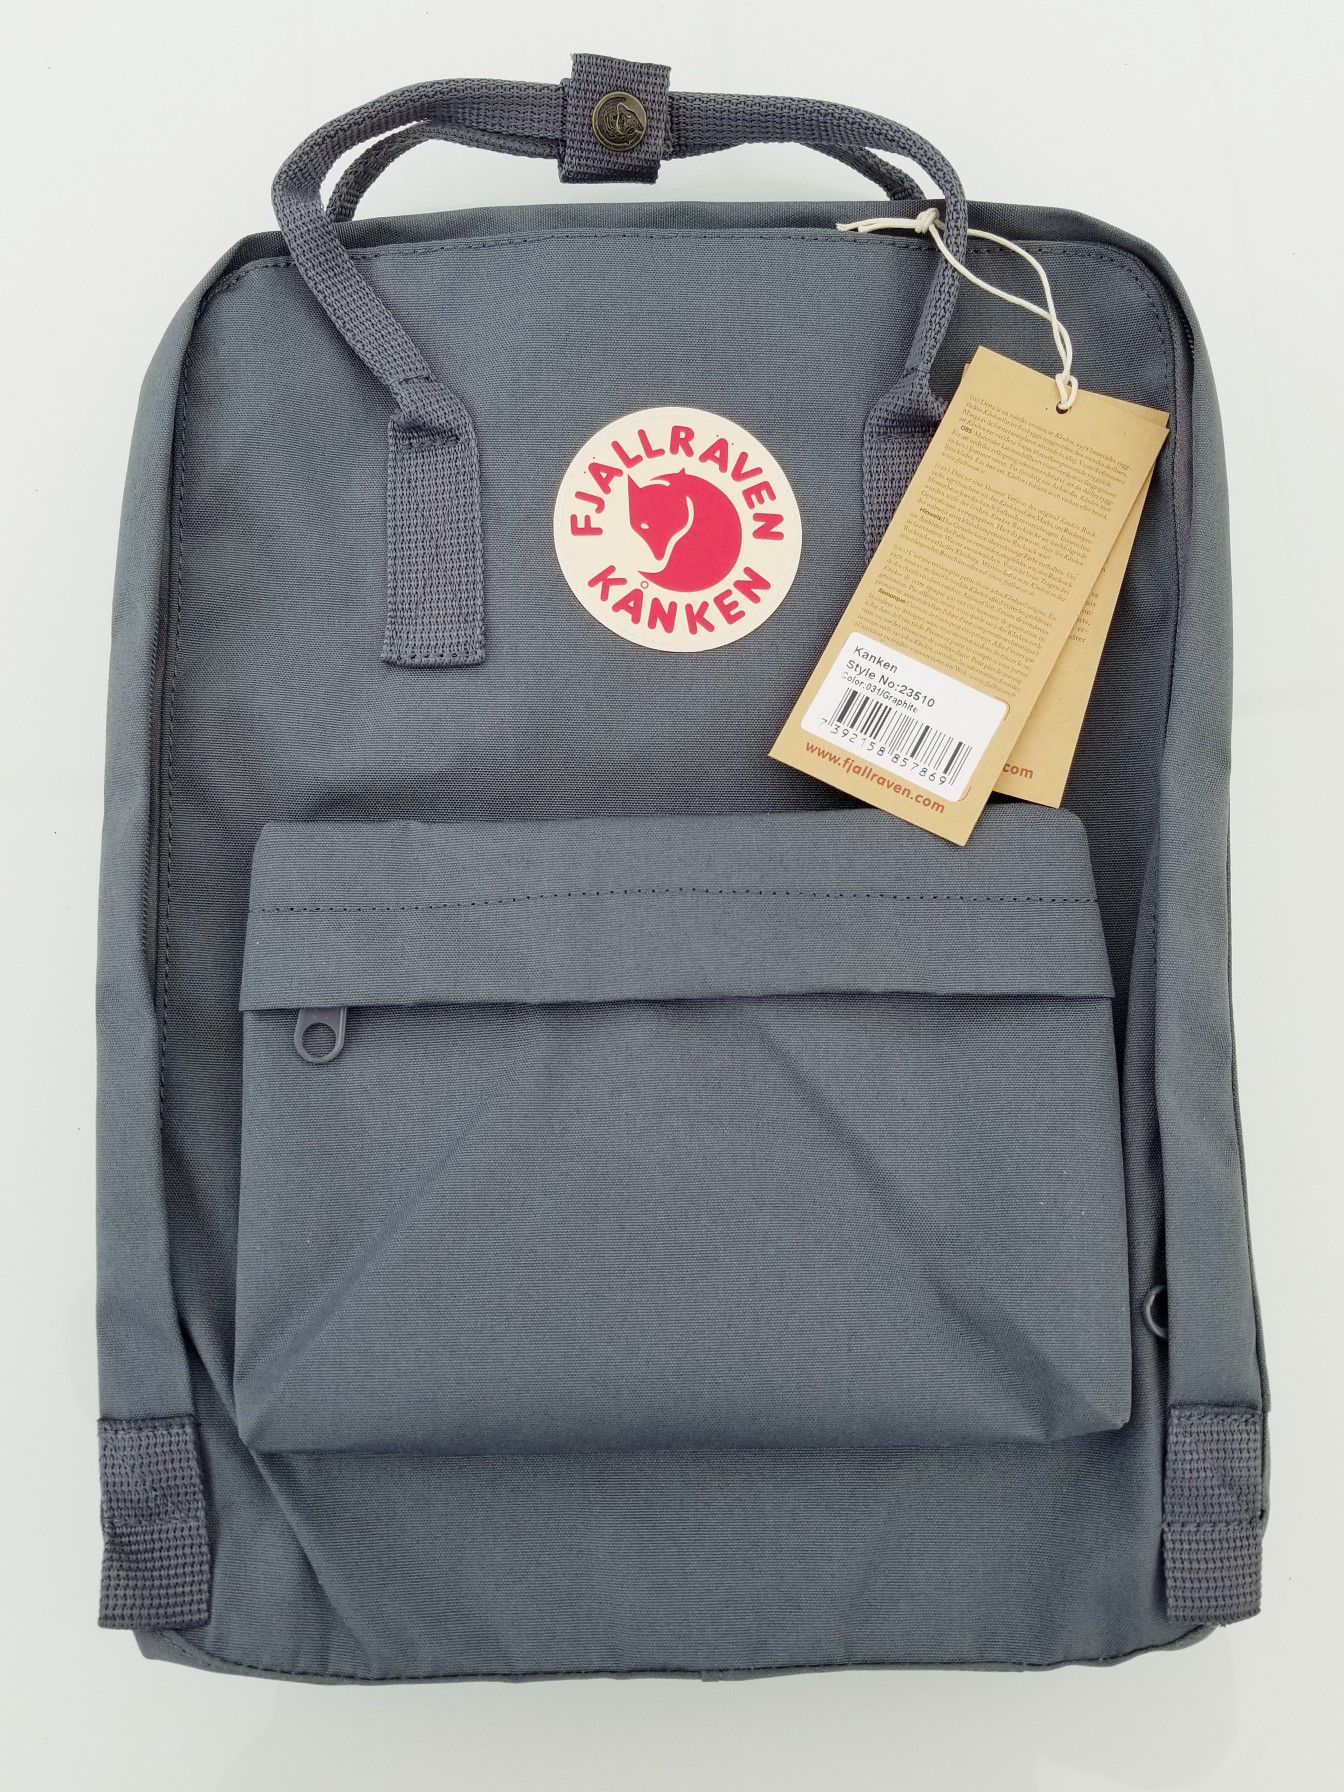 BRAND NEW FJALLRAVEN KANKEN BACKPACK CLASSIC 16L GRAPHITE WITH TAGS